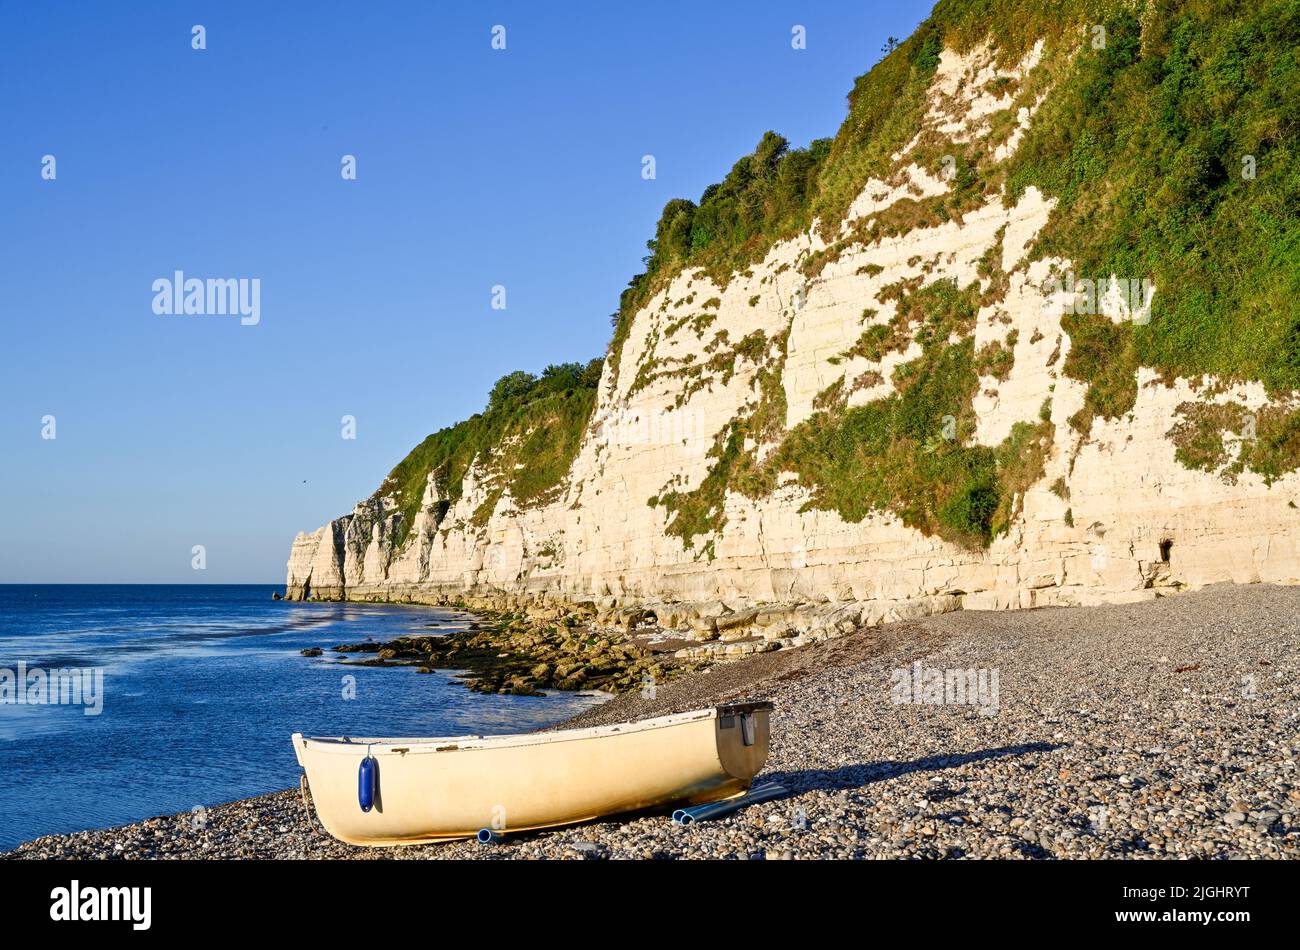 Devon Beer Beach and Rowing Boat Summer Stock Photo